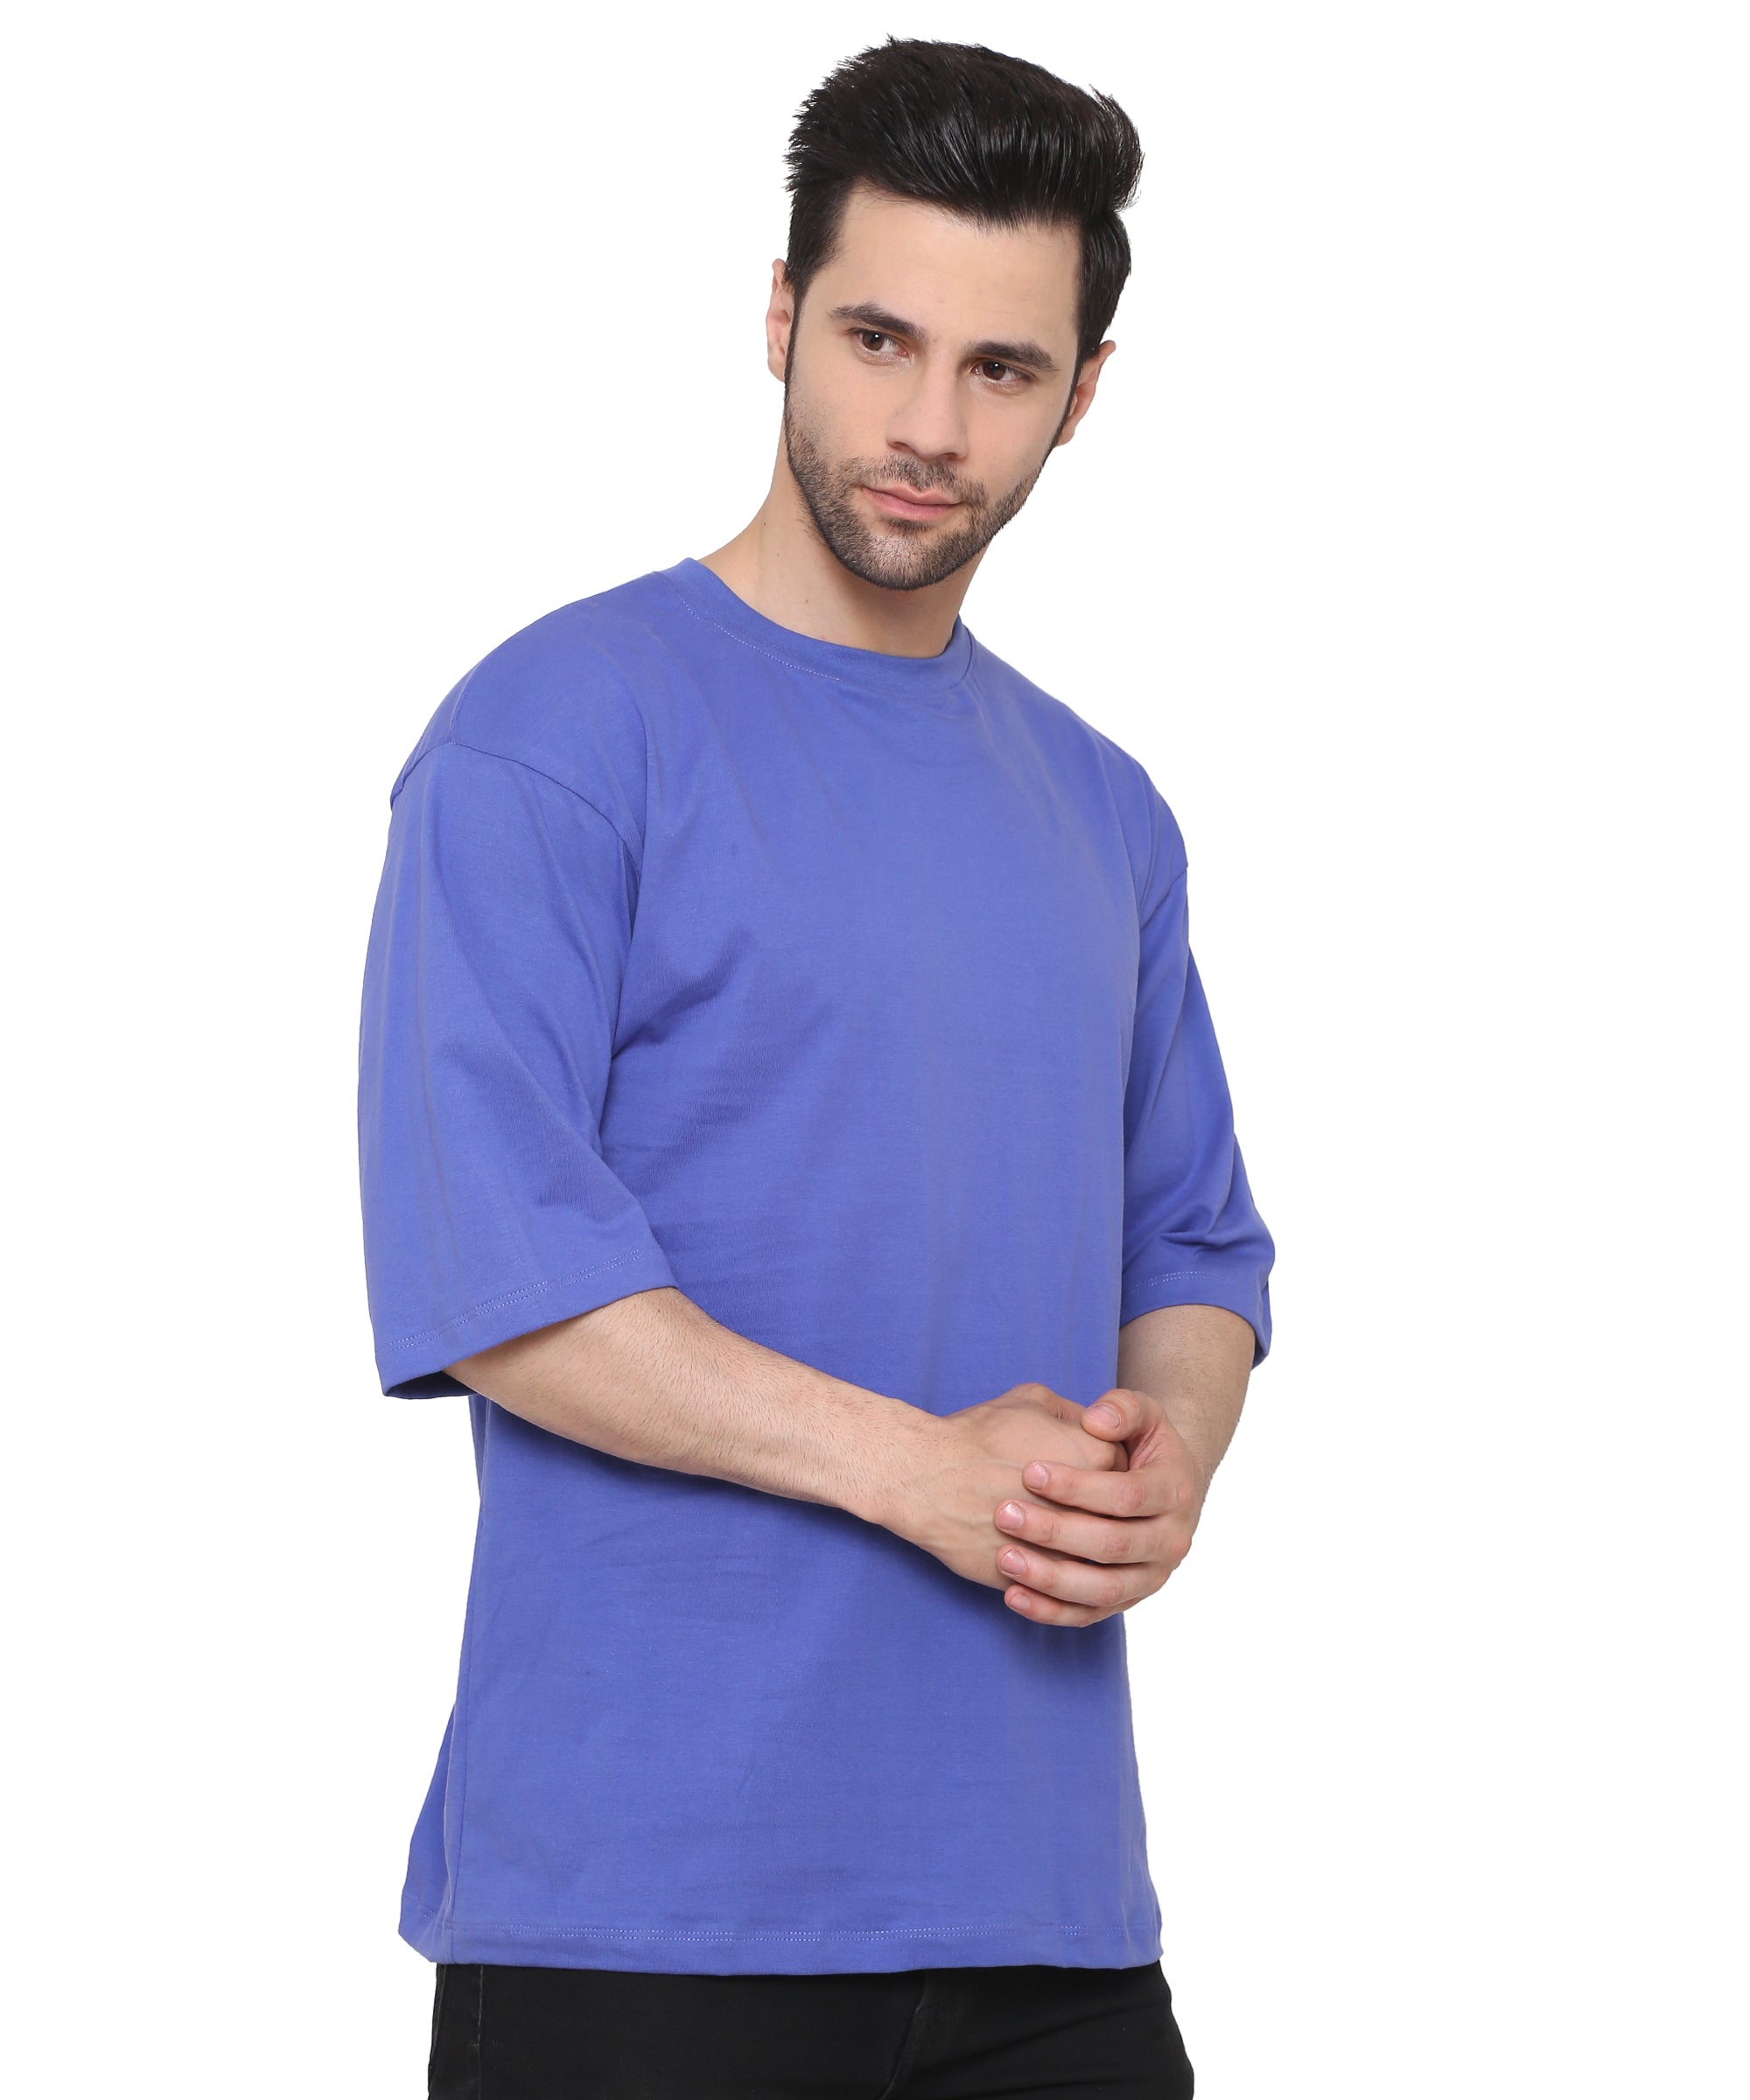 Blue Marguerite Oversized Cotton T-shirts Relaxed Fit Tees for Men